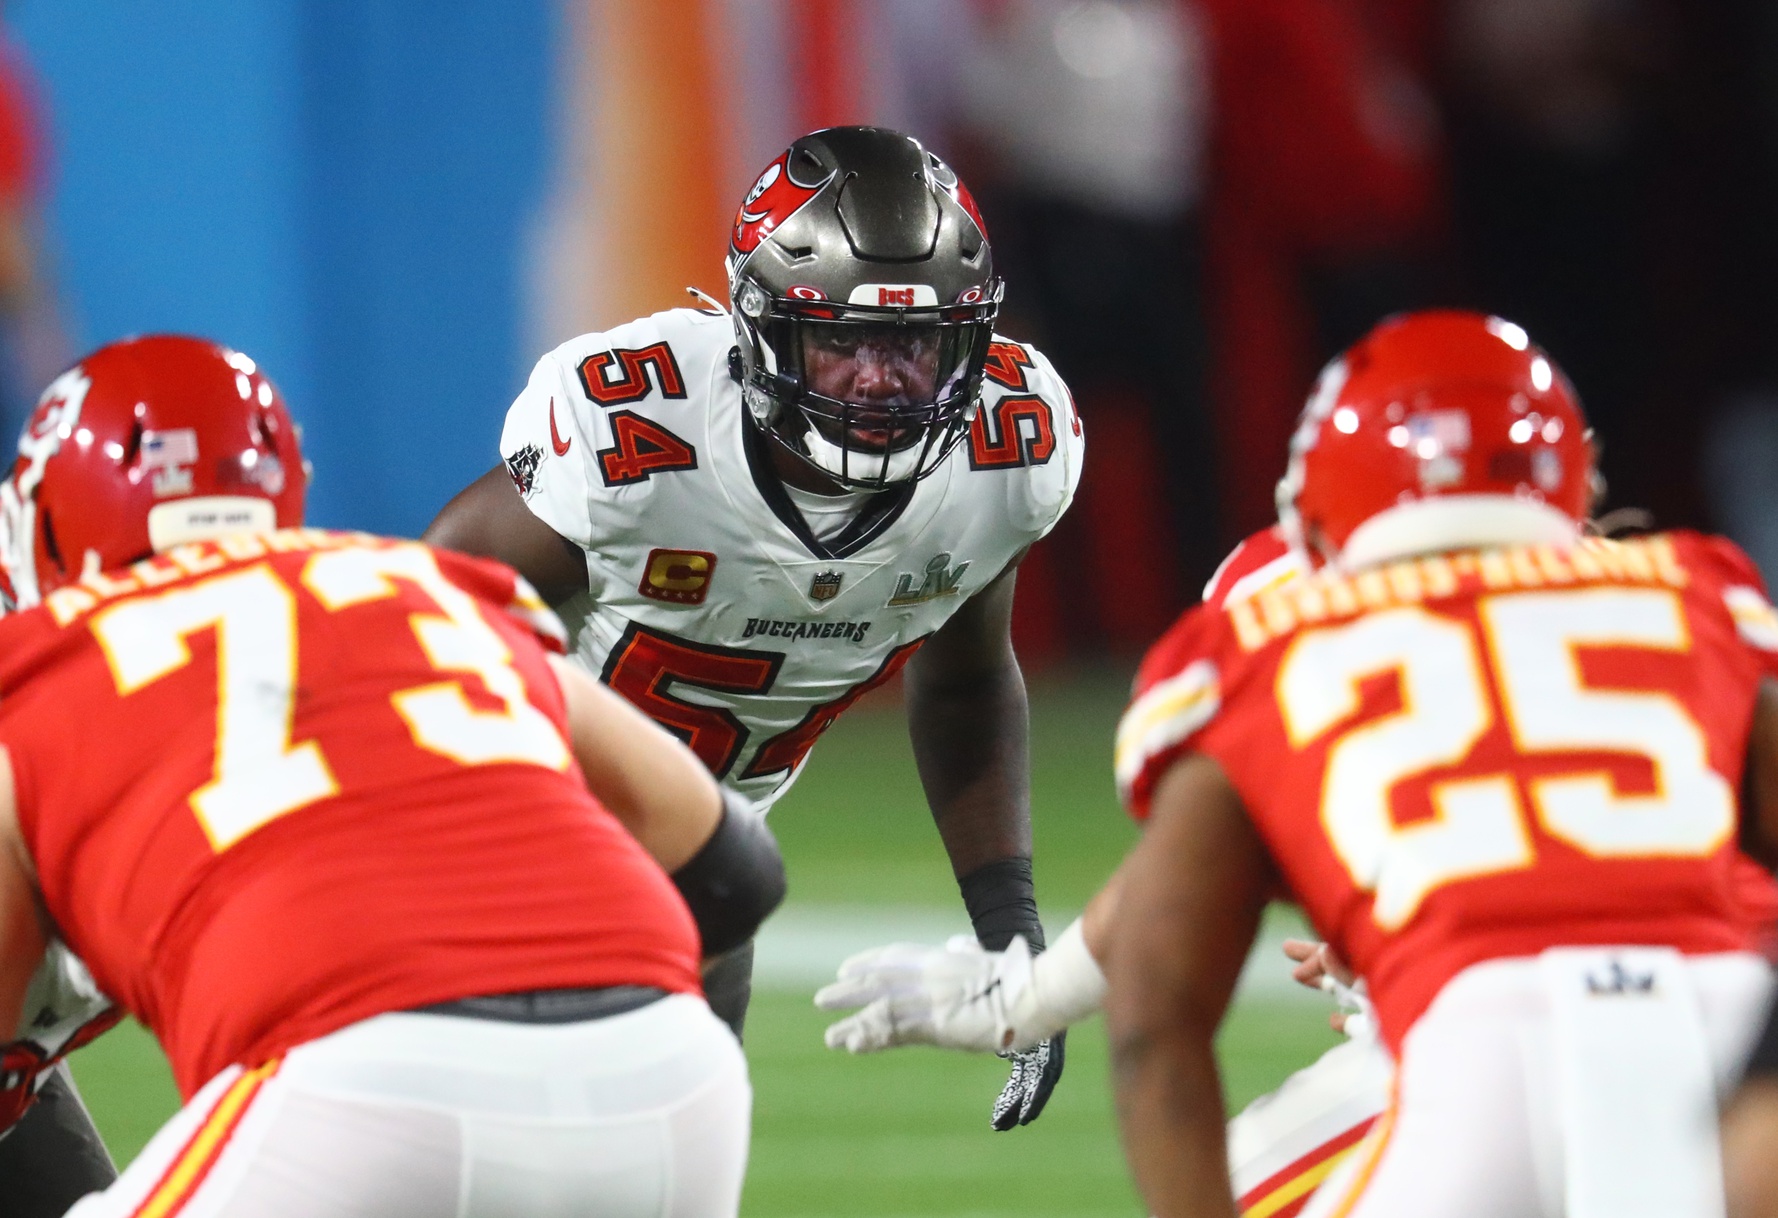 A Look at Spotrac's Free Agent Predictions for the Tampa Bay Buccaneers